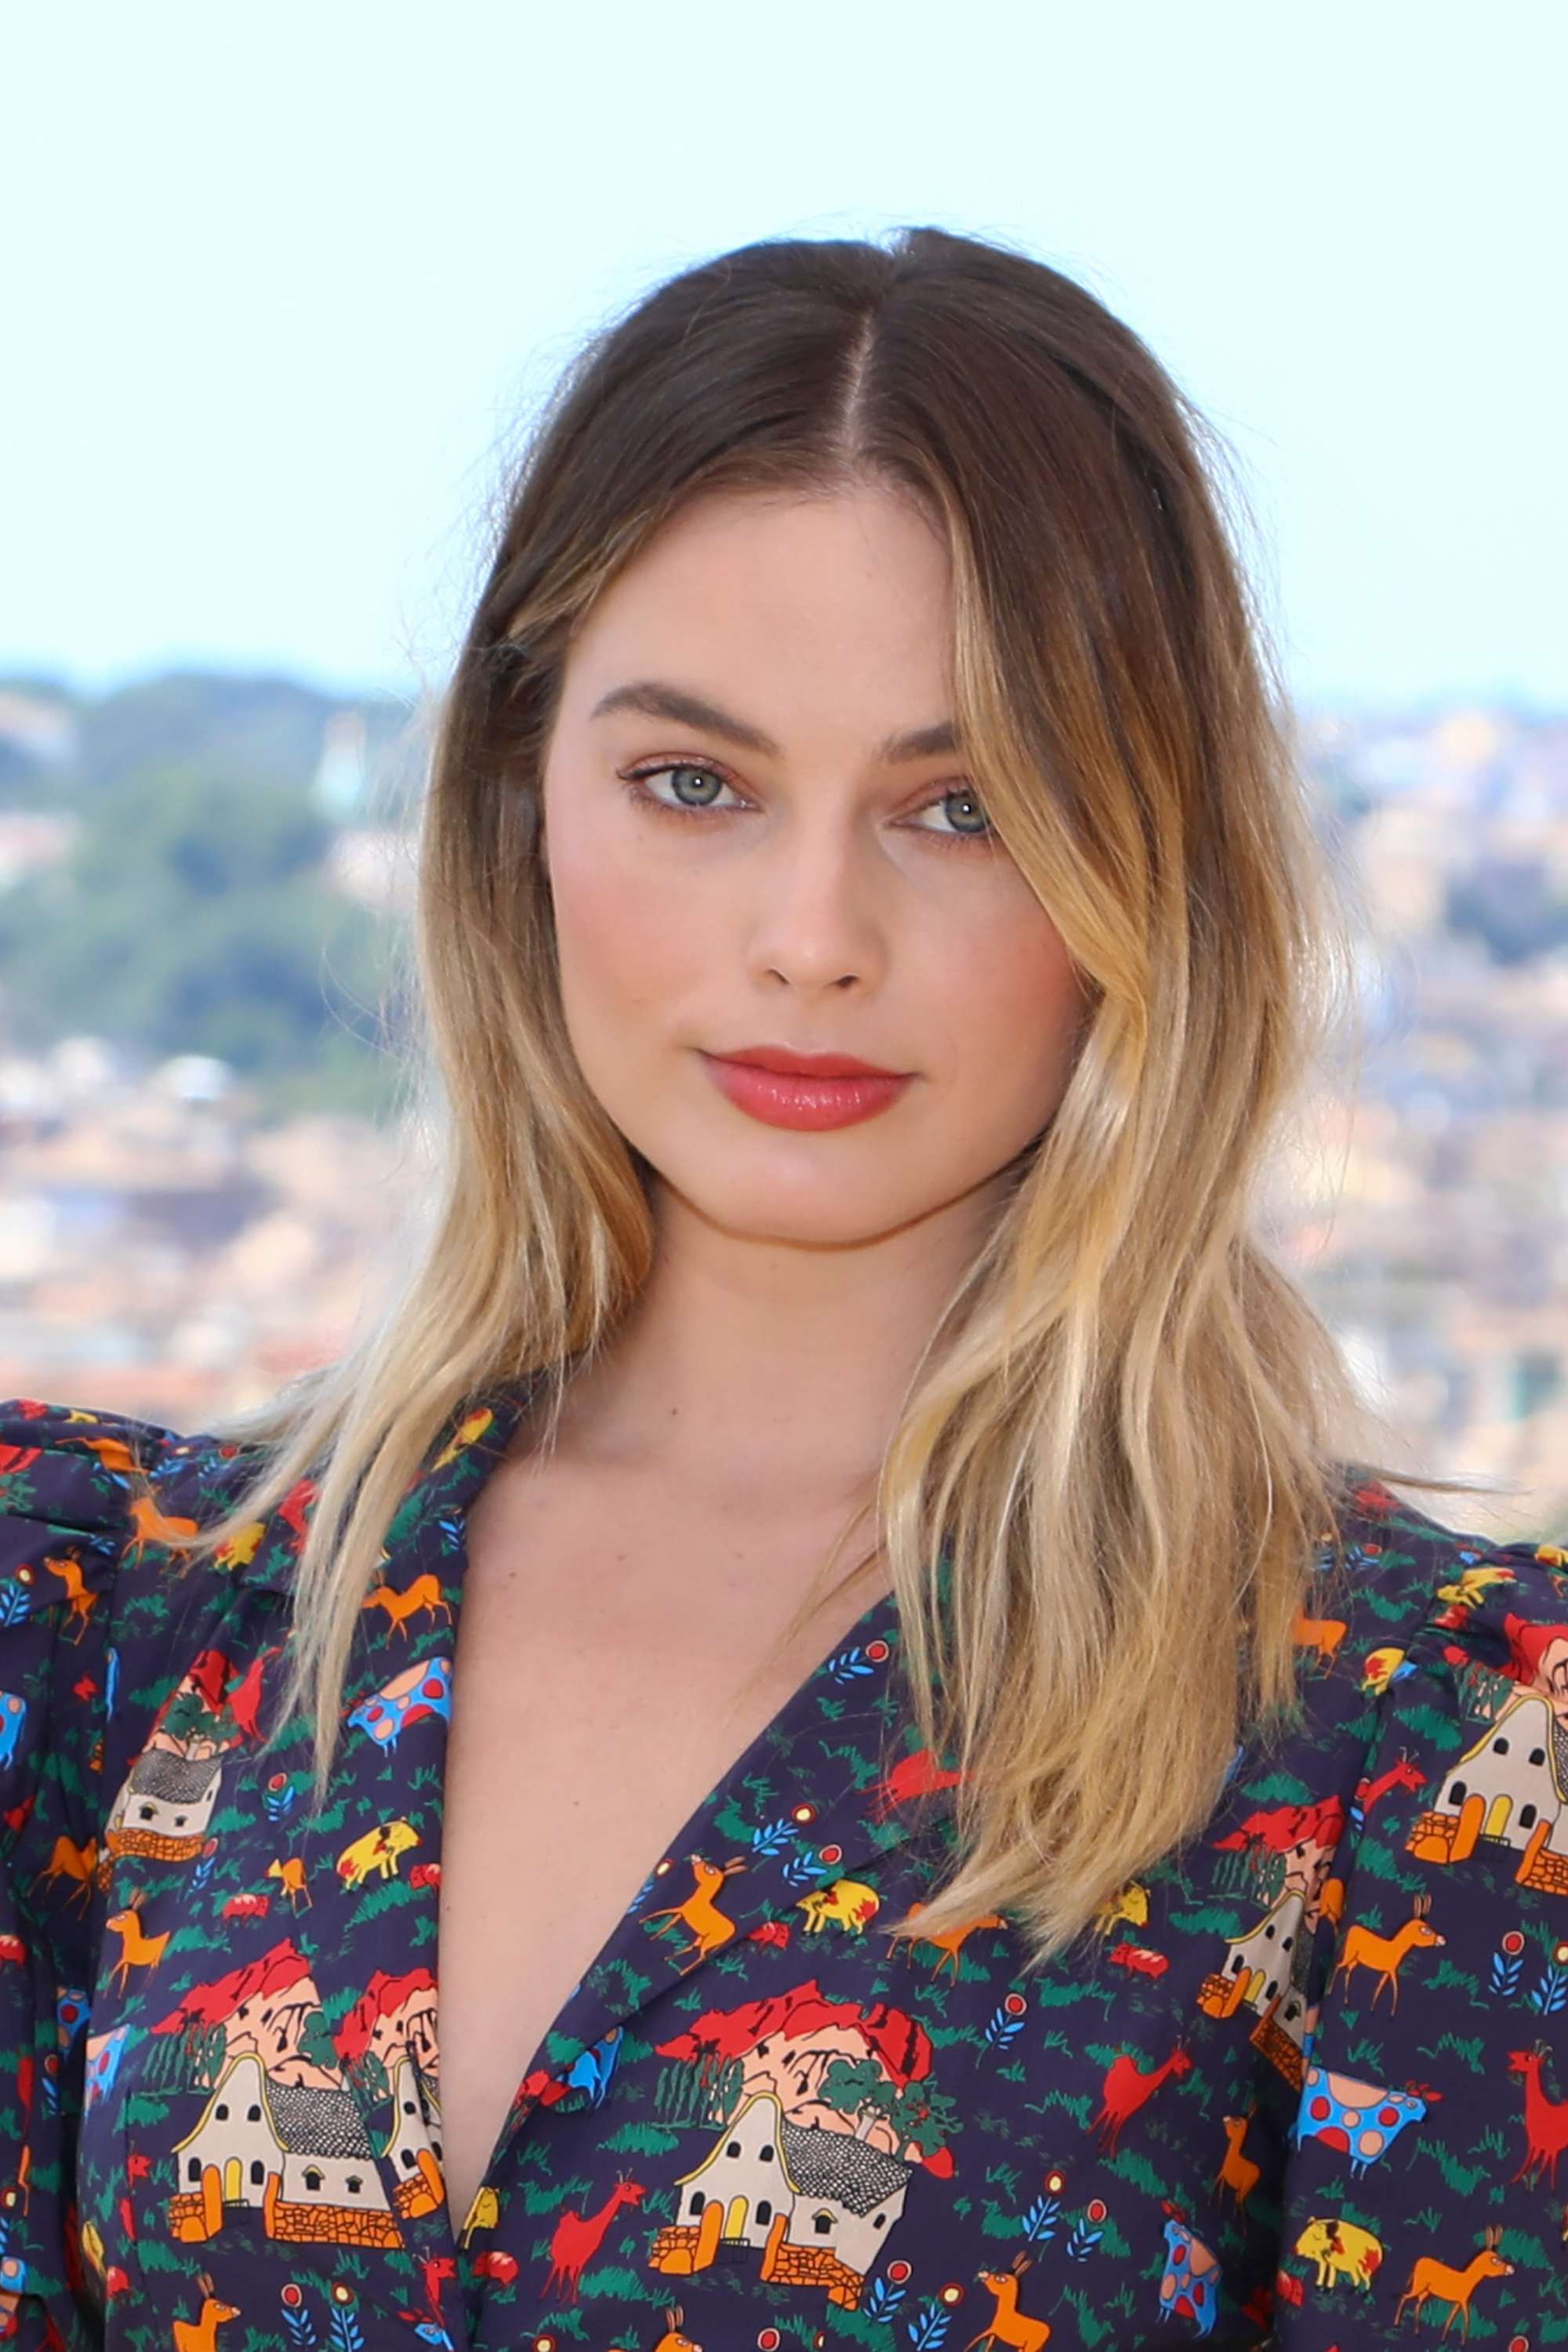 Margot Robbie with brunette to blonde hair with grown-out roots